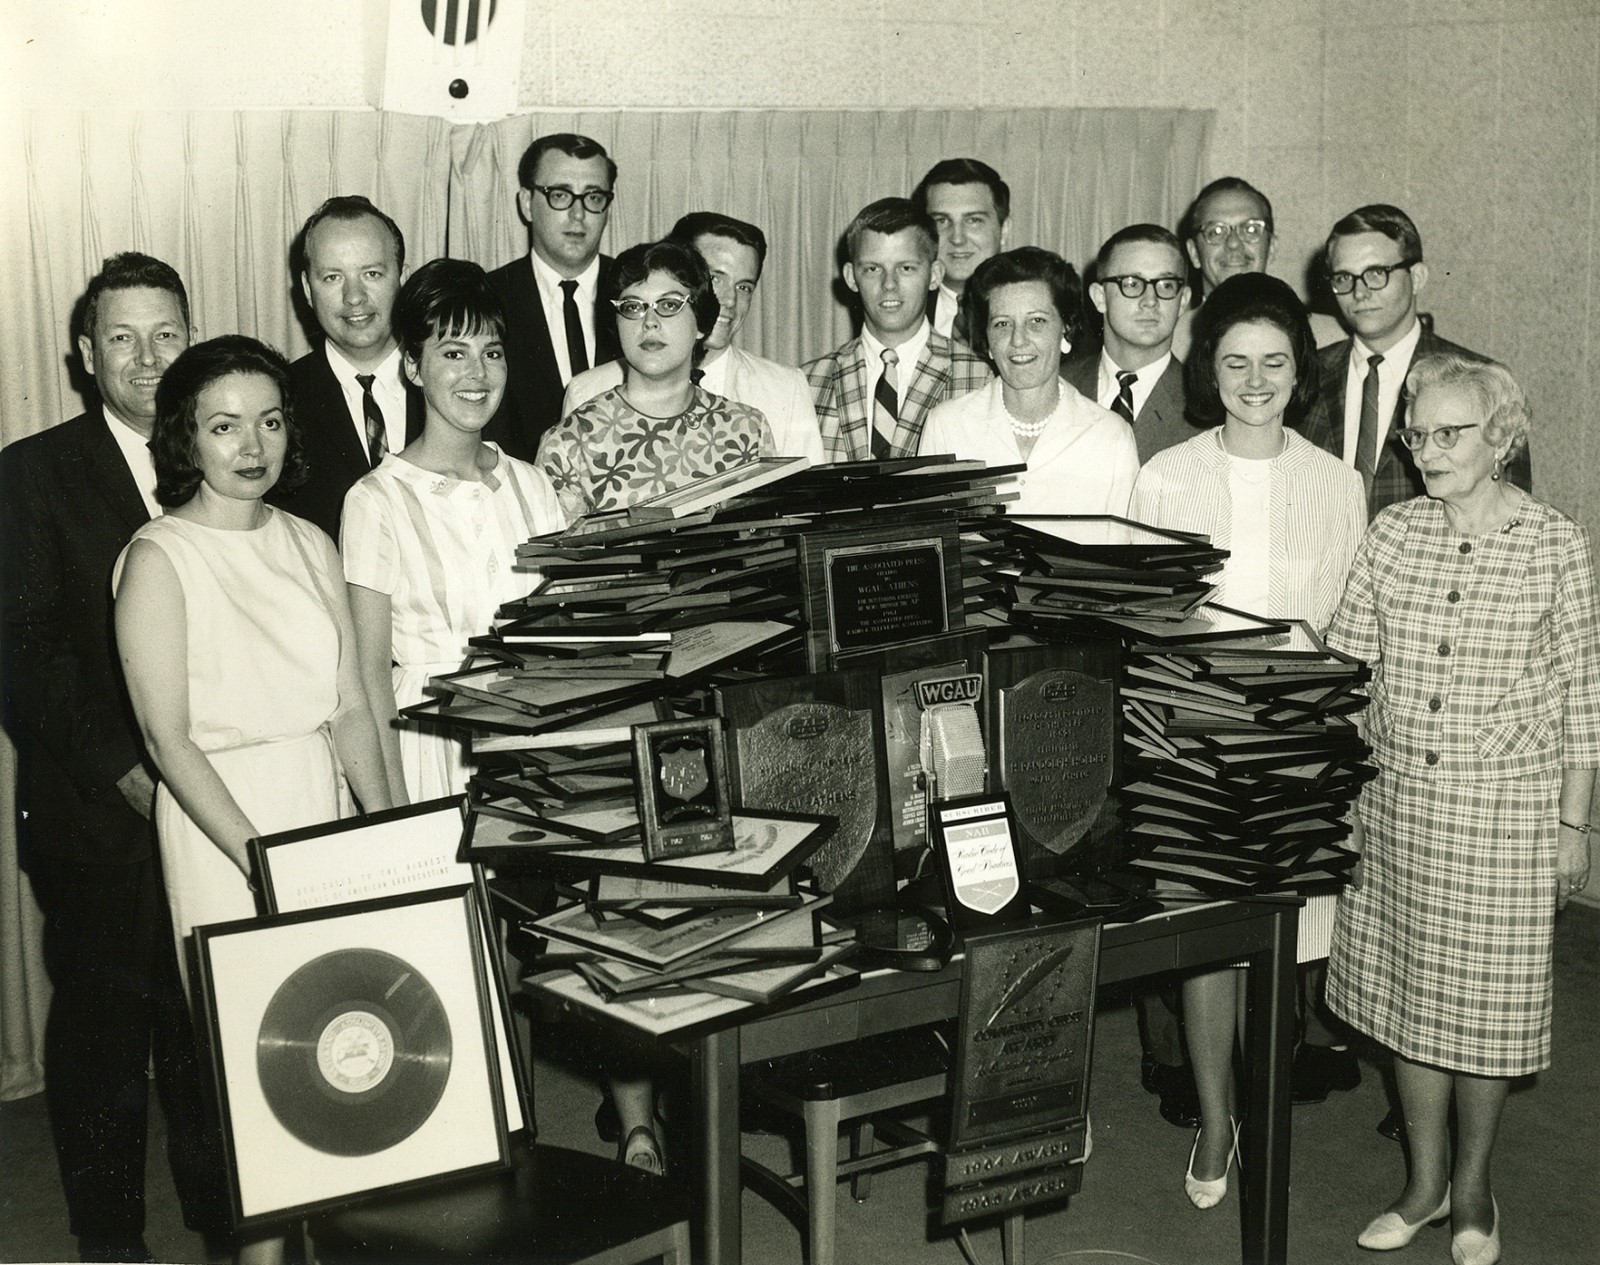 Black and white image of a group of unidentified women and men at WSB radio station in the 1960s